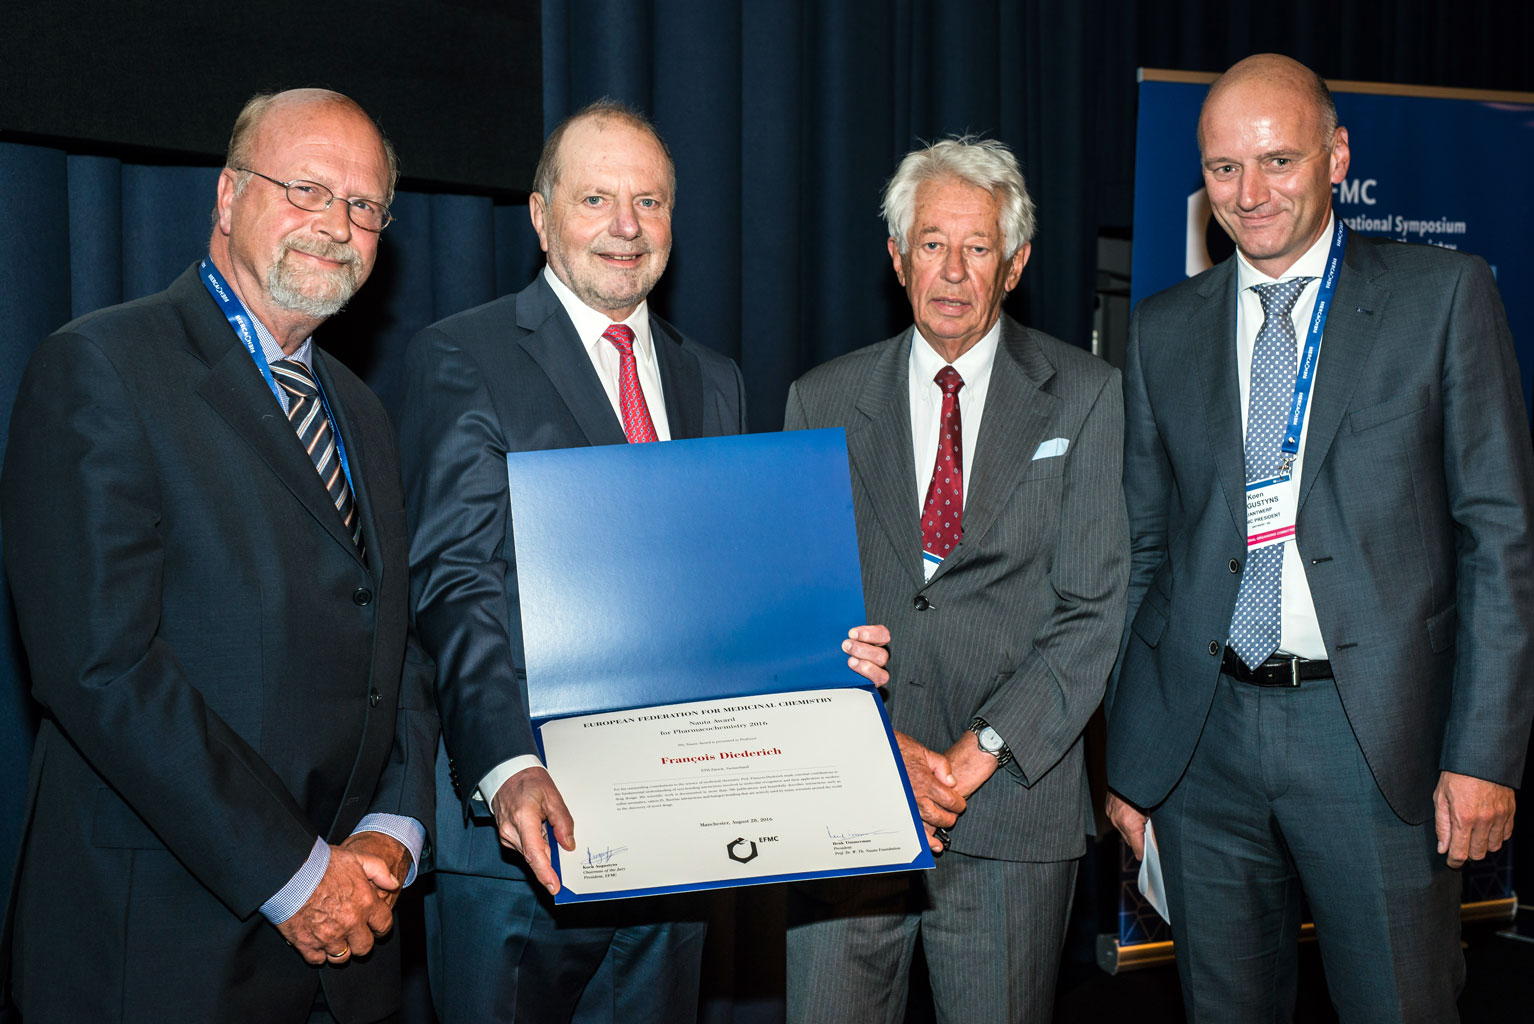 Enlarged view: Prof. Diederich receives the Nauta Award during the XXIV International Symposium on Medicinal Chemistry (EFMC-ISMC)